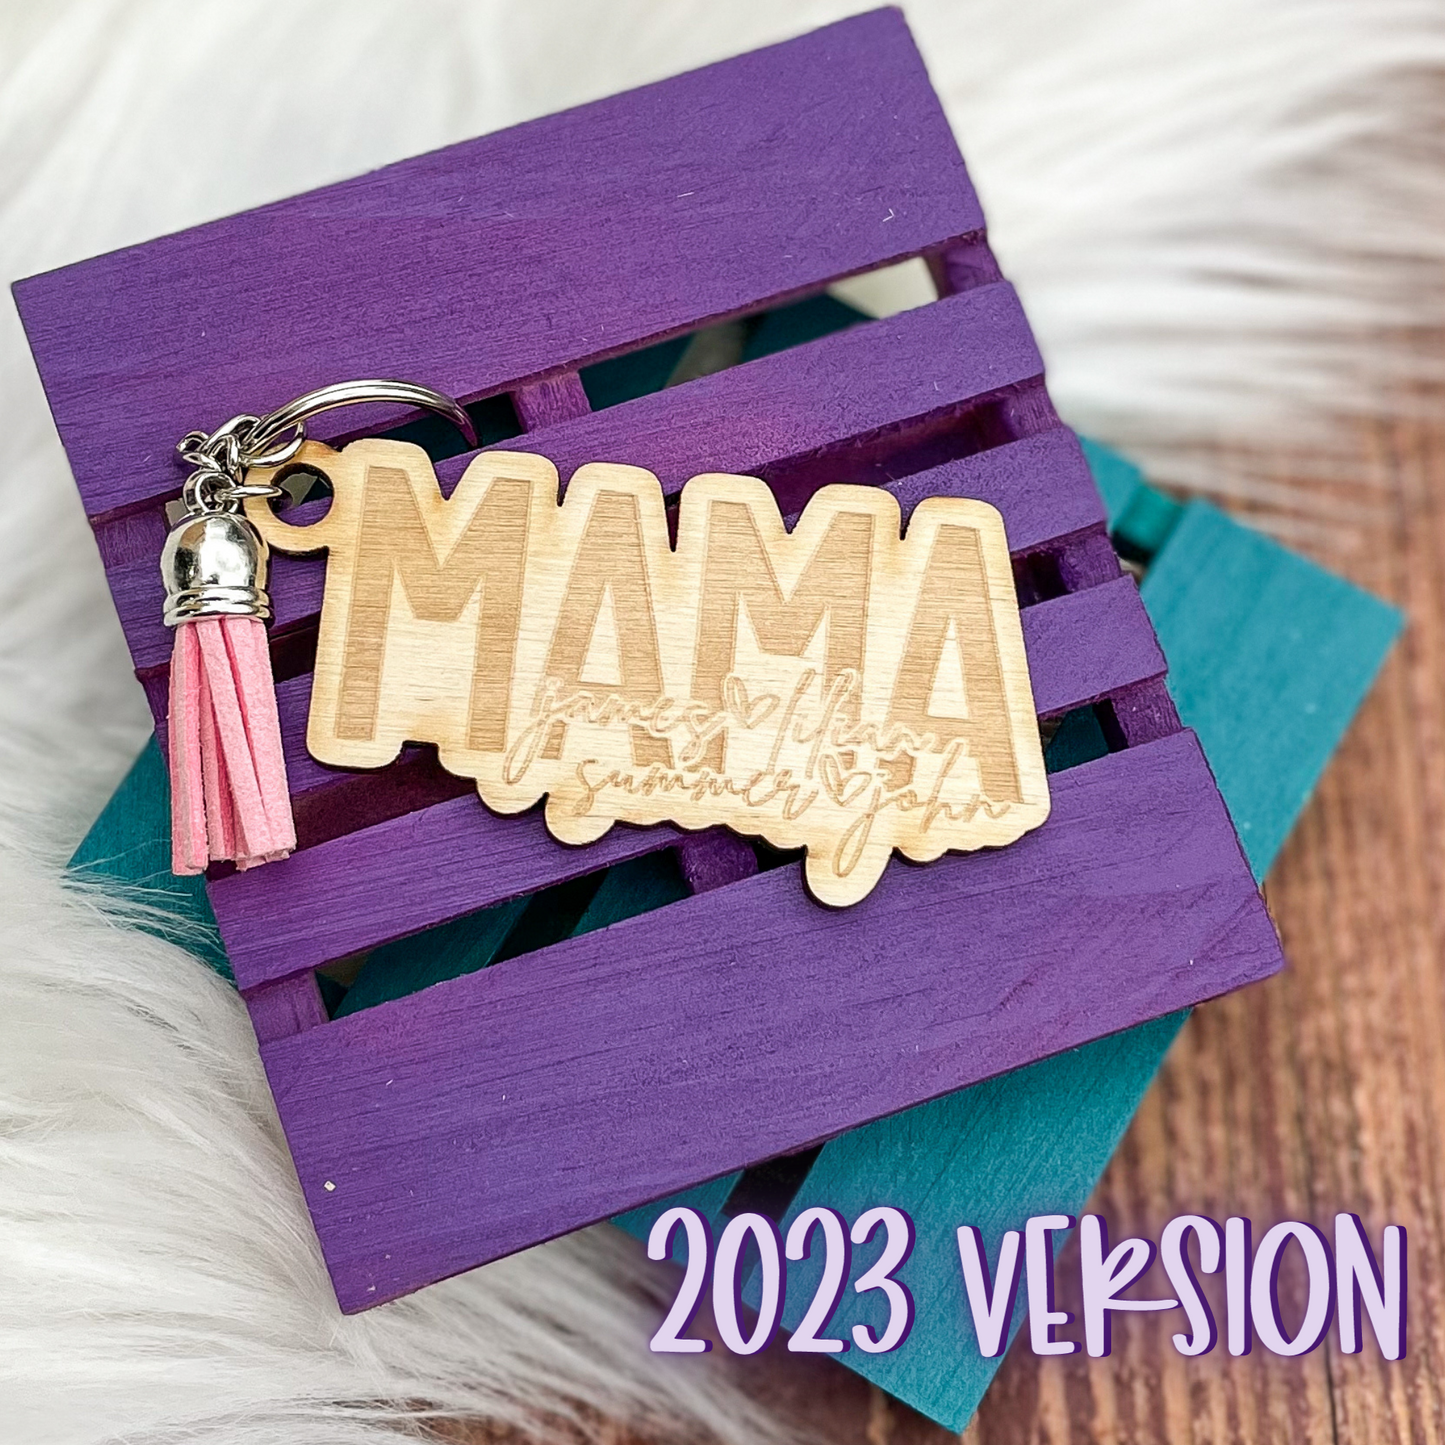 BEST SELLER: Personalized ENGRAVED Wood Keychains (with names)